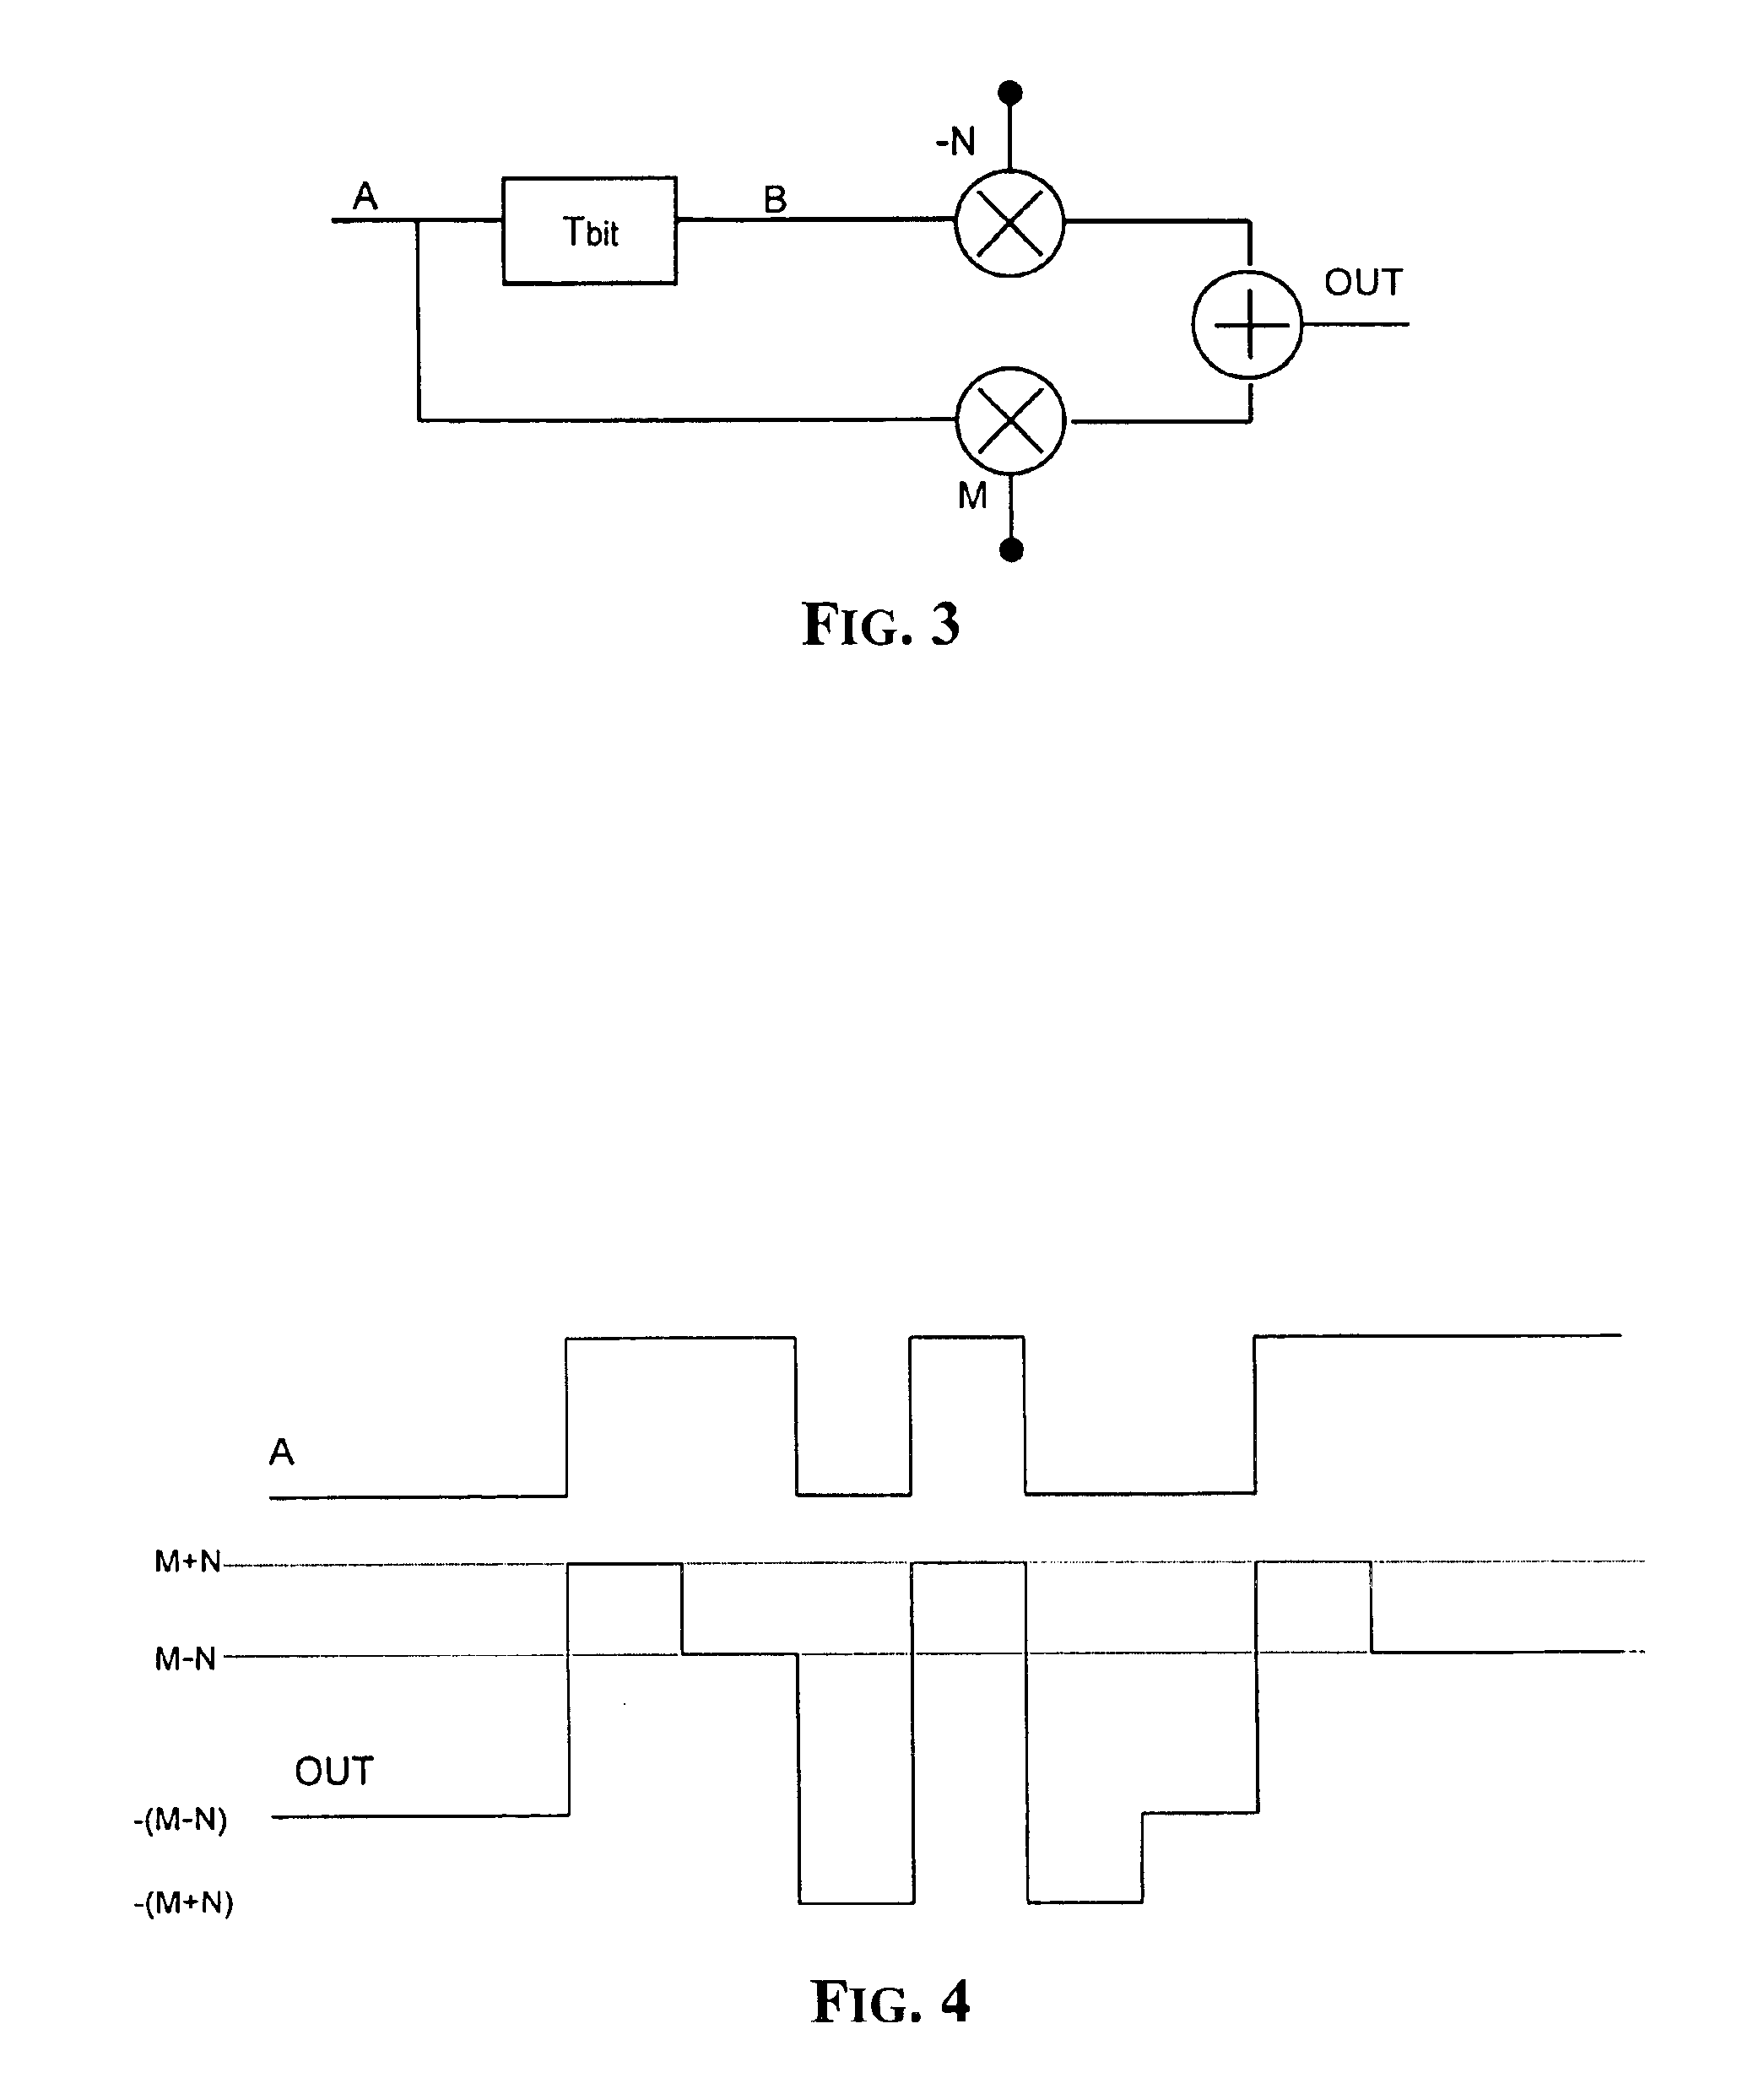 Method and amplification circuit with pre-emphasis